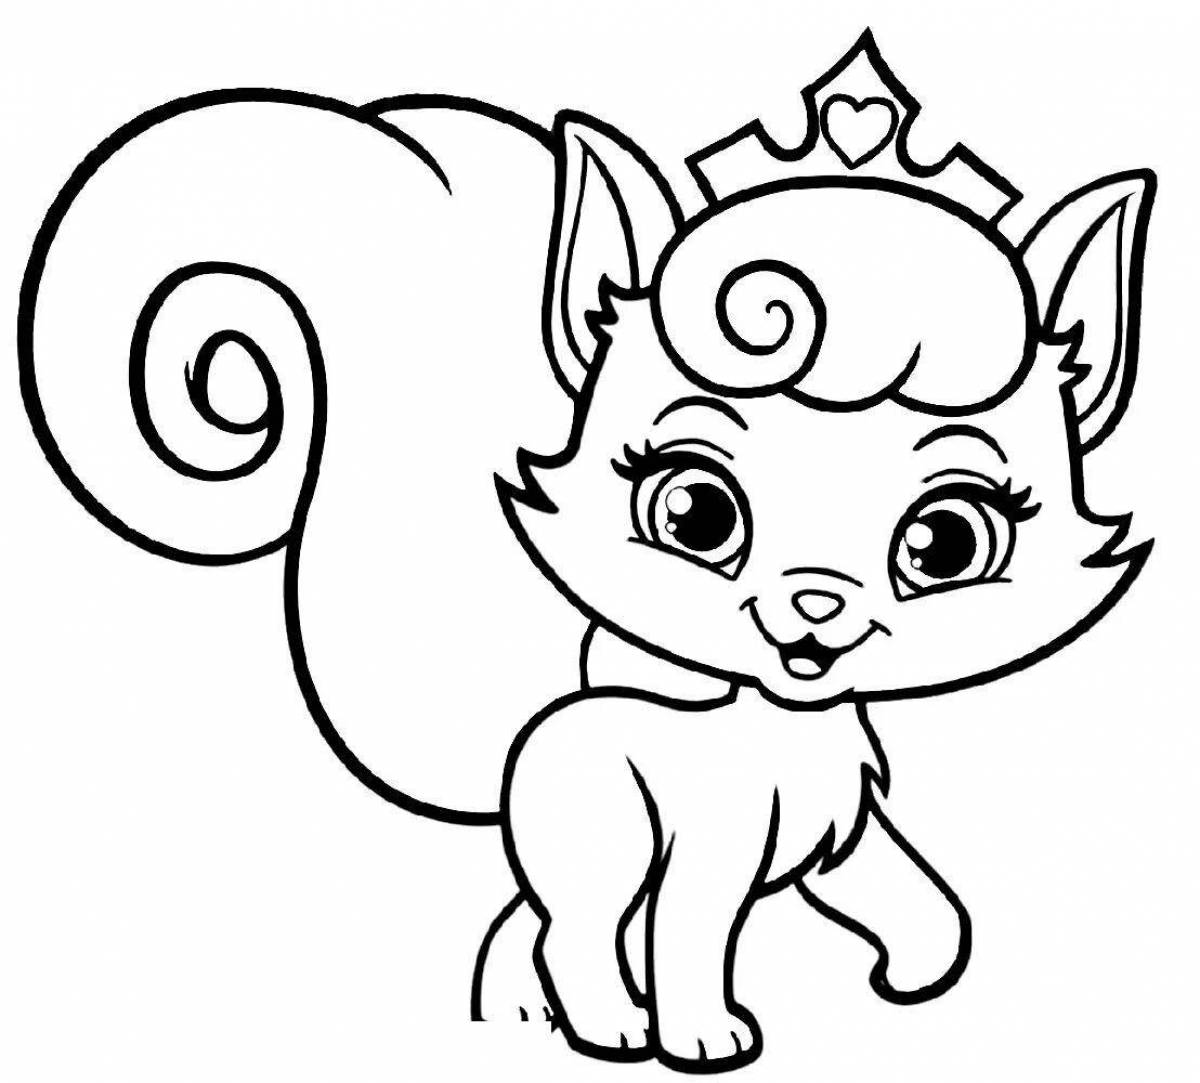 Cute furry friends coloring page